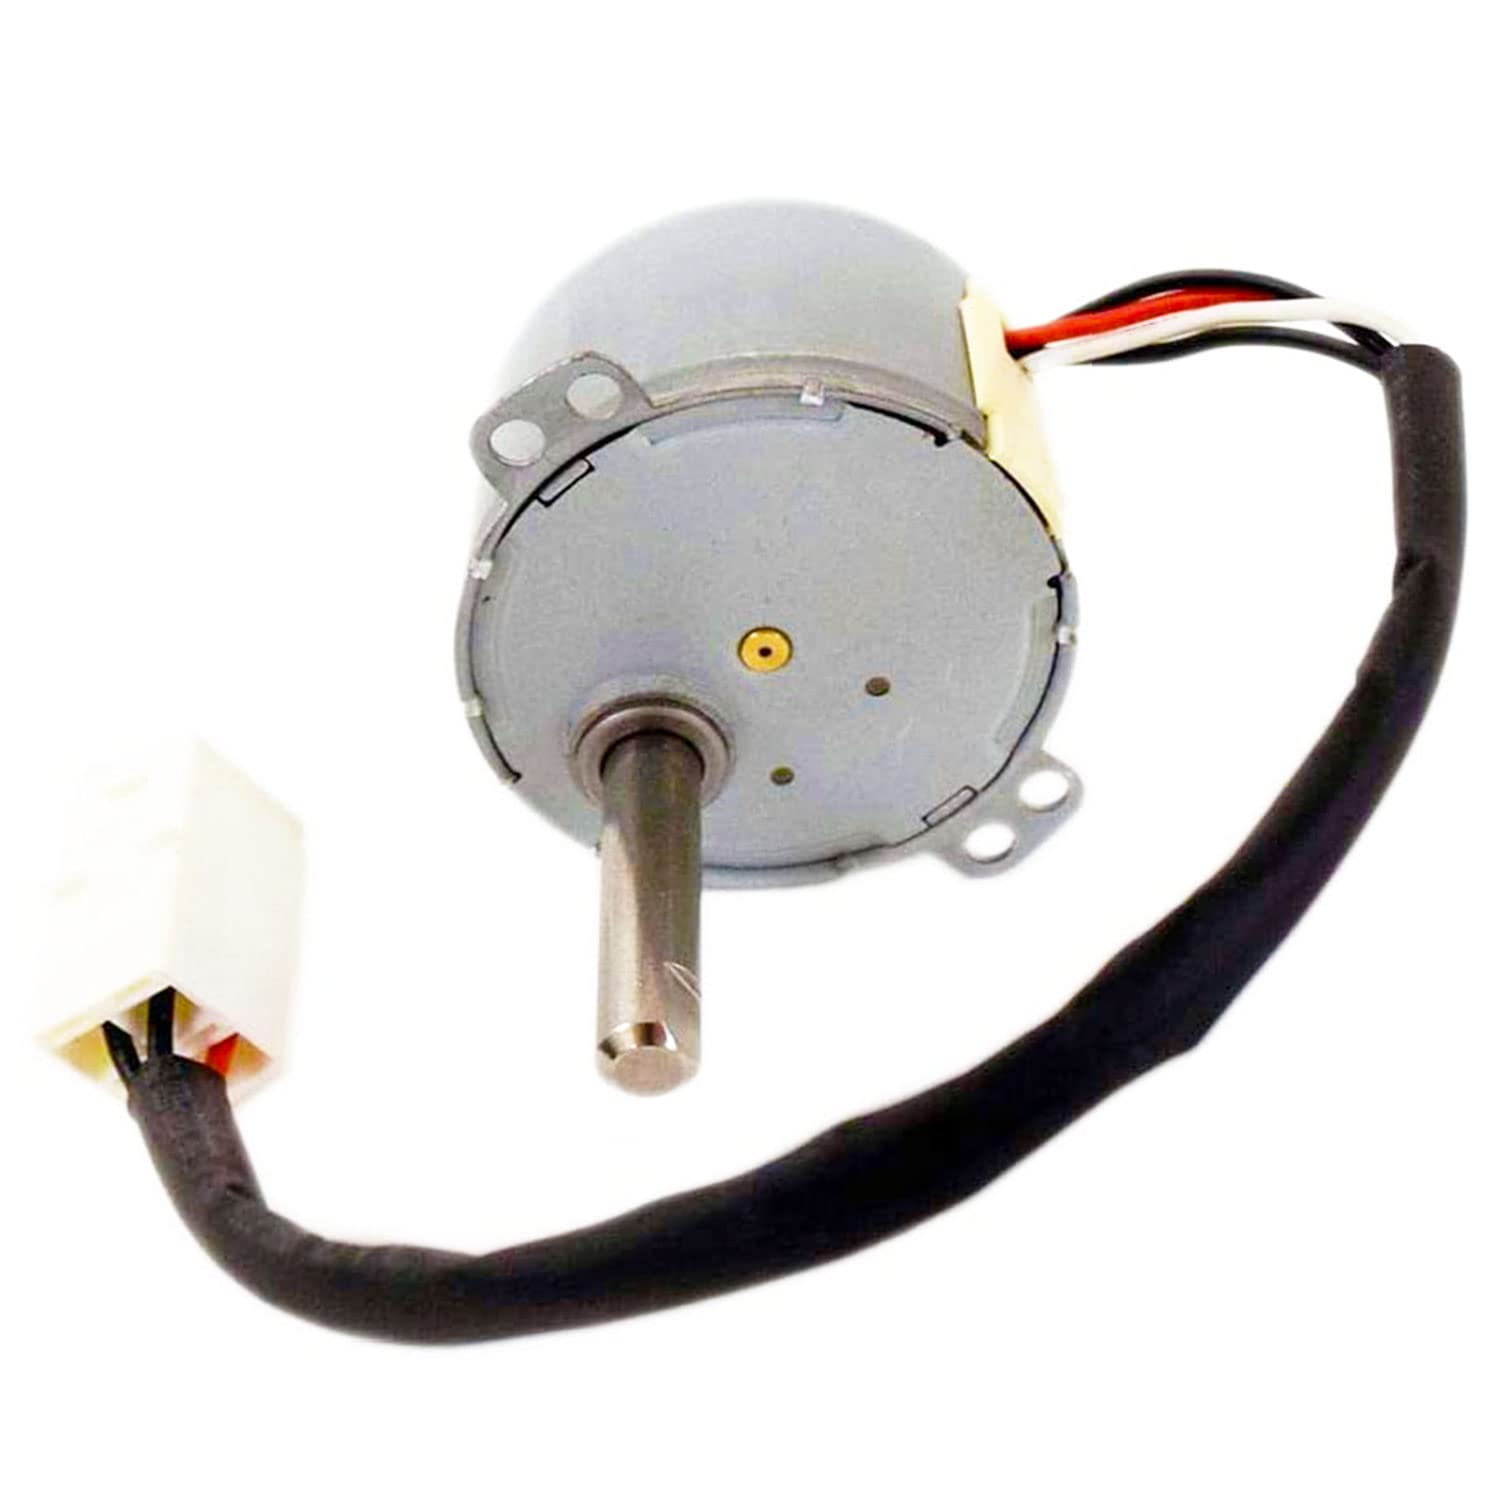 OEM MANIA WE CARE YO FBA] NEW OEM Produced DD31-00013B for SAMSUNg Dishwasher WaterWall Spray Arm Motor SRM-36HR by OEM Mania Replacement Part - 1 YE